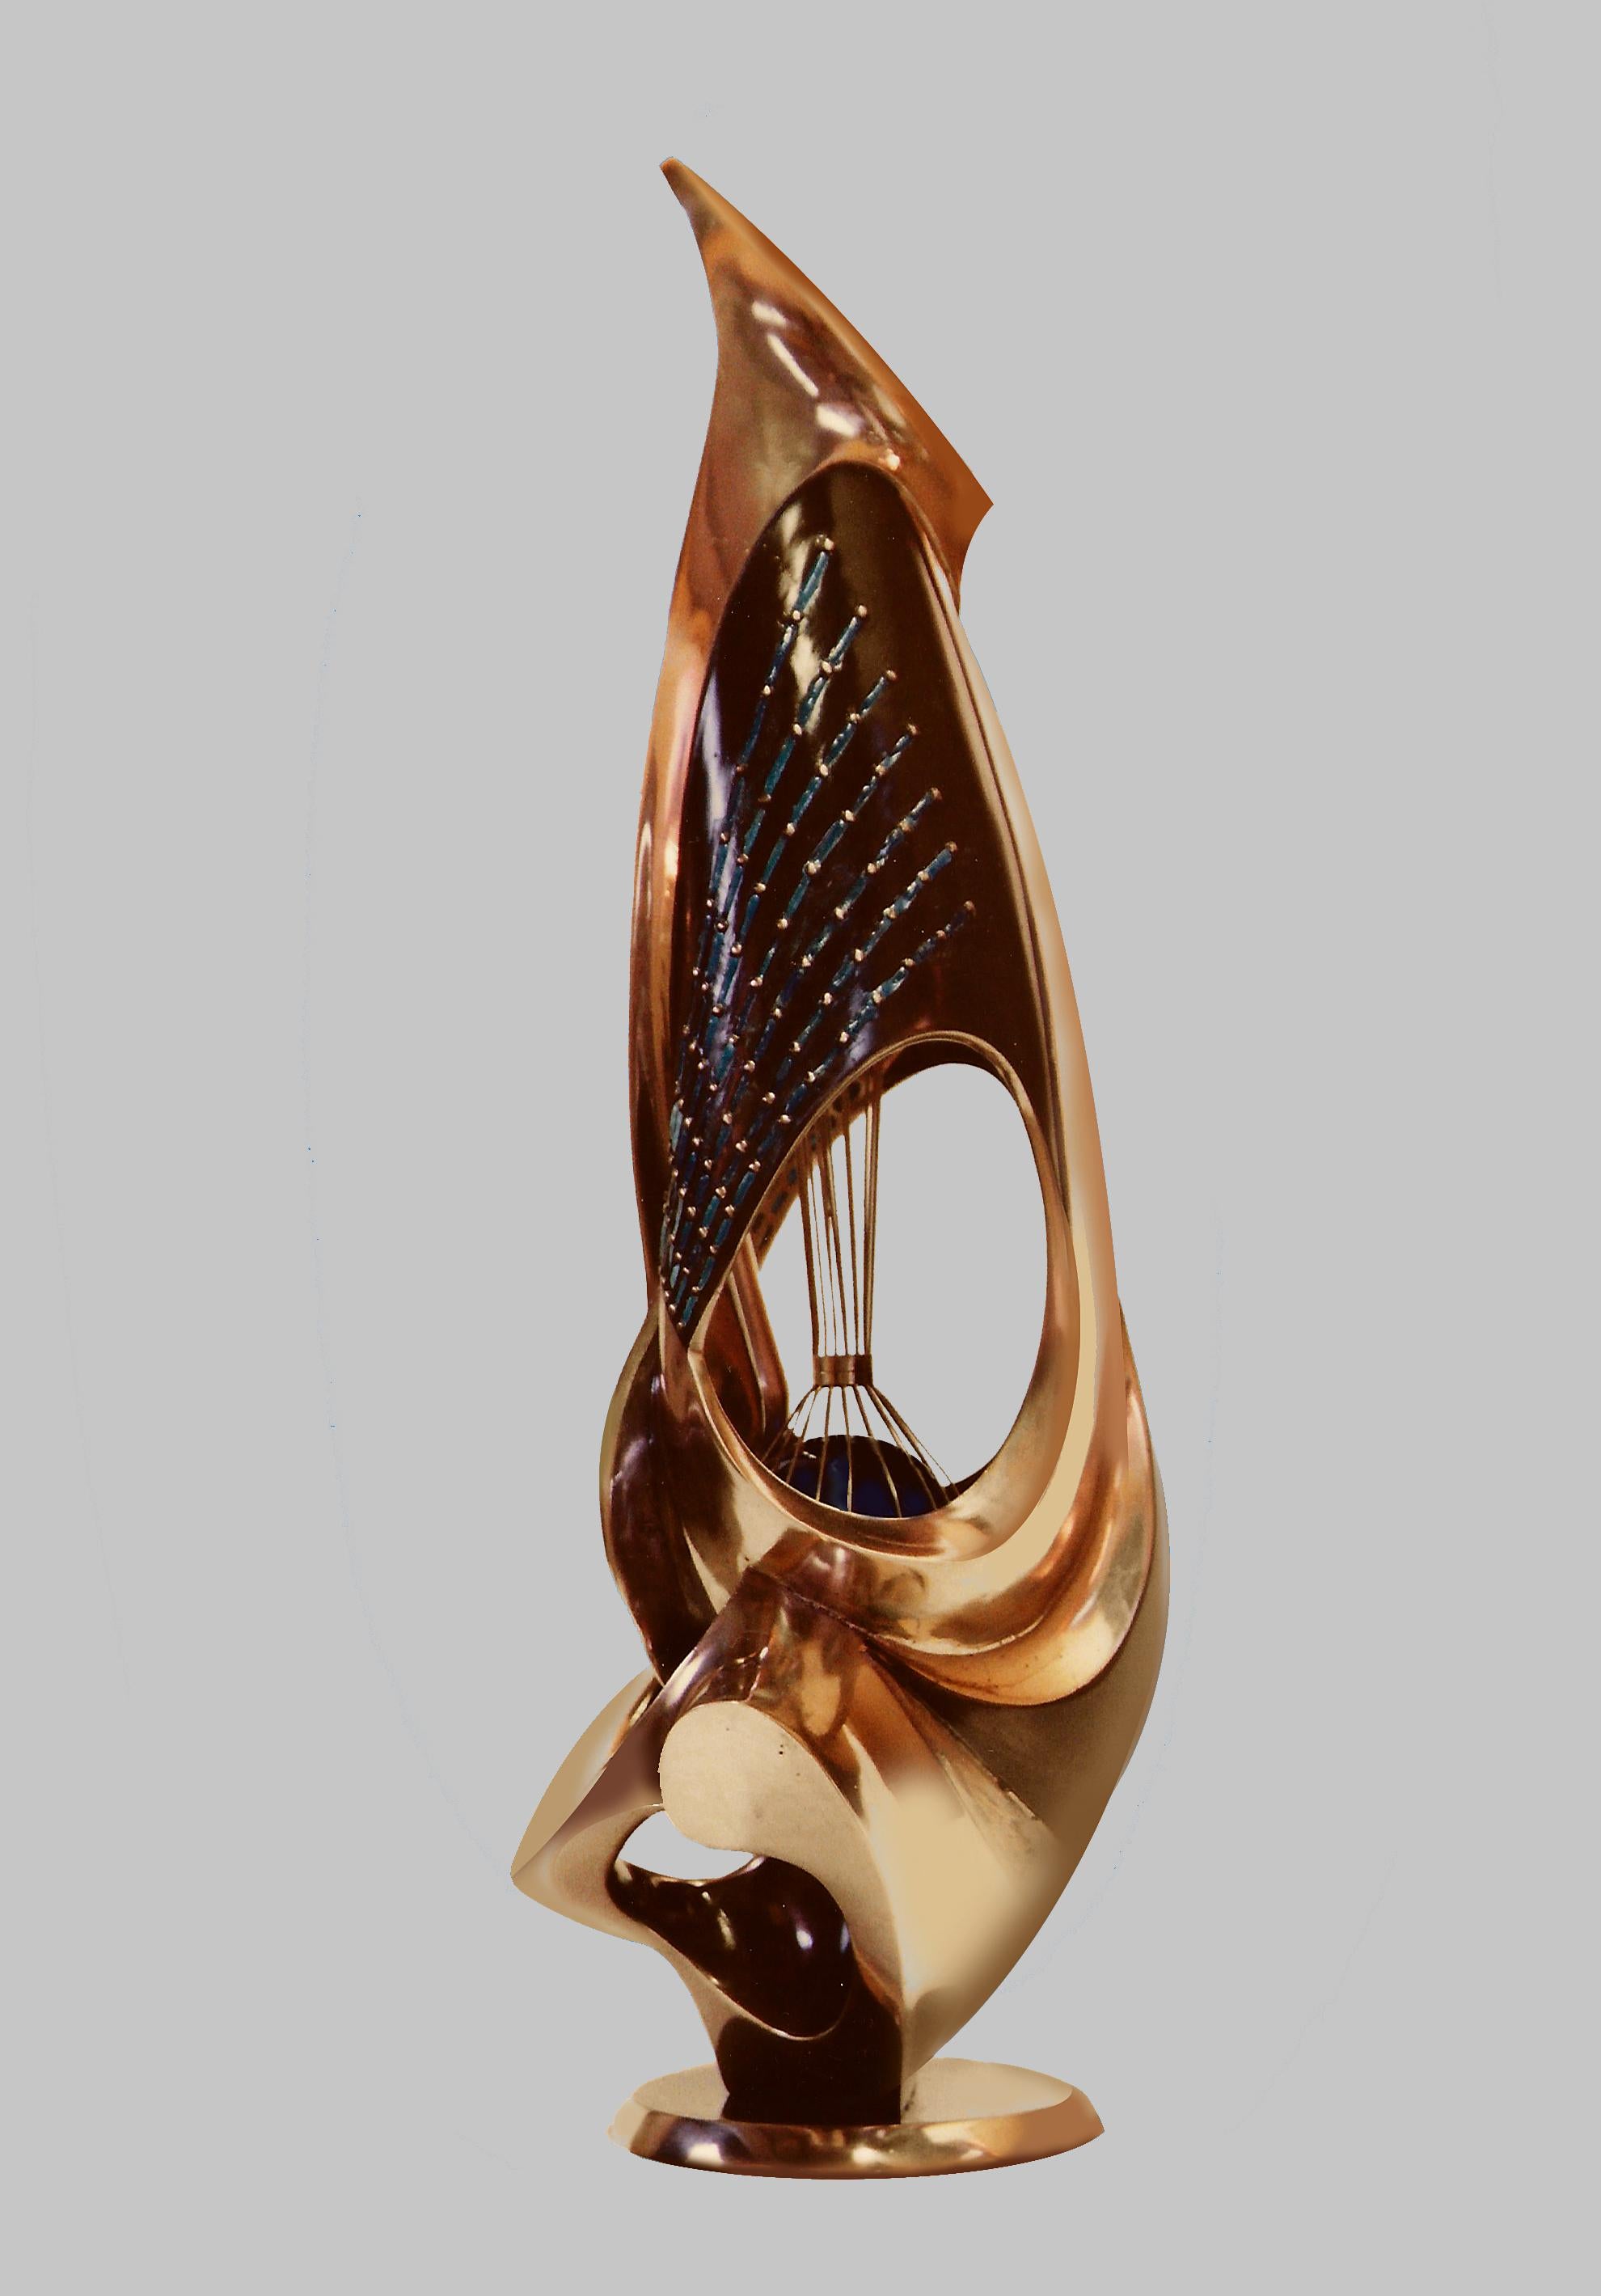 RARITY - Gold Abstract Sculpture by Yevgeniy Prokopov